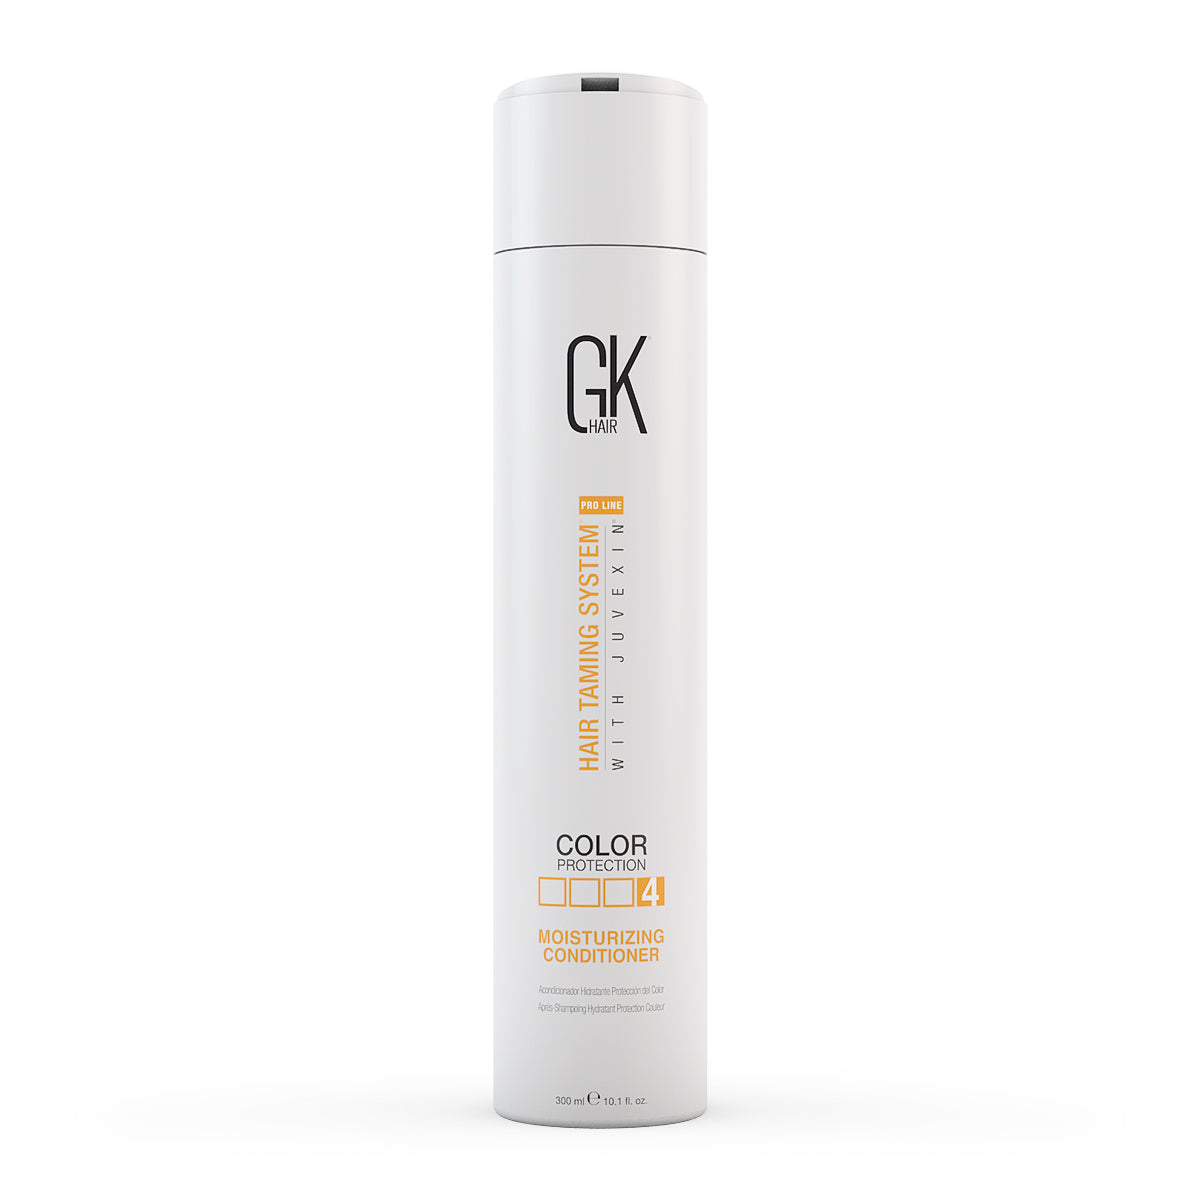 GK Hair Moisturizing Color Protection Conditioner 300ml